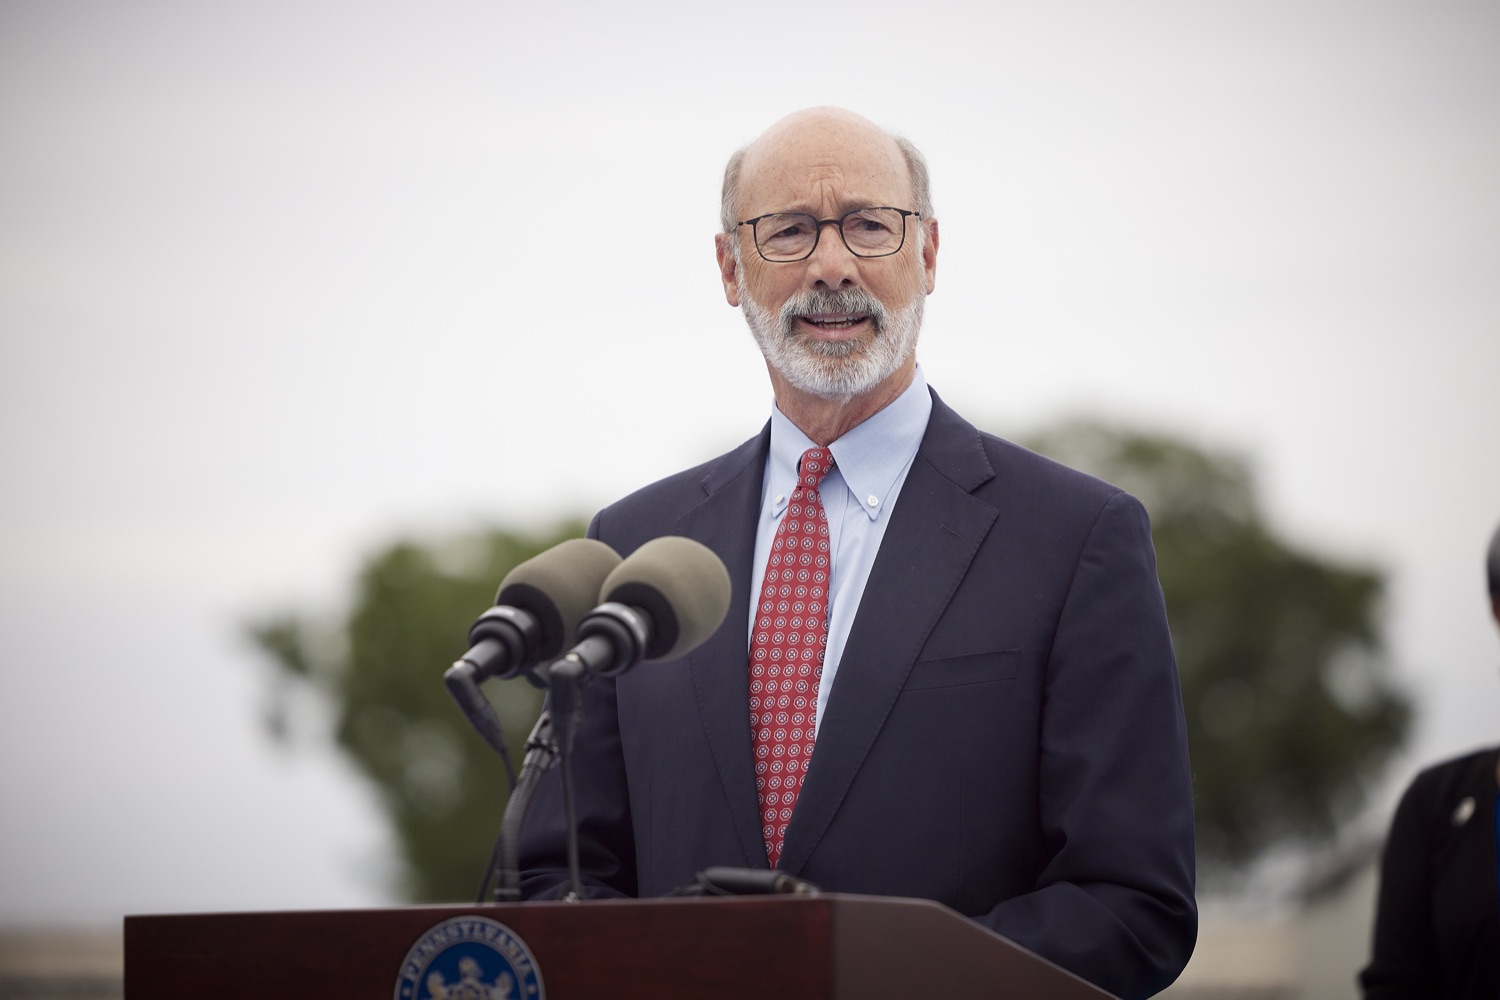 Pennsylvania Governor Tom Wolf speaks with the press.   Governor Tom Wolf today visited the Early Learning Center at Crispus Attucks in York to highlight his new state child tax credit program, modeled after the federal program, to support Pennsylvanias working families and ensure unbarred access to high-quality early childhood education.  York, PA   July 26, 2022<br><a href="https://filesource.amperwave.net/commonwealthofpa/photo/22049_gov_childTaxCredit_dz_016.JPG" target="_blank">⇣ Download Photo</a>